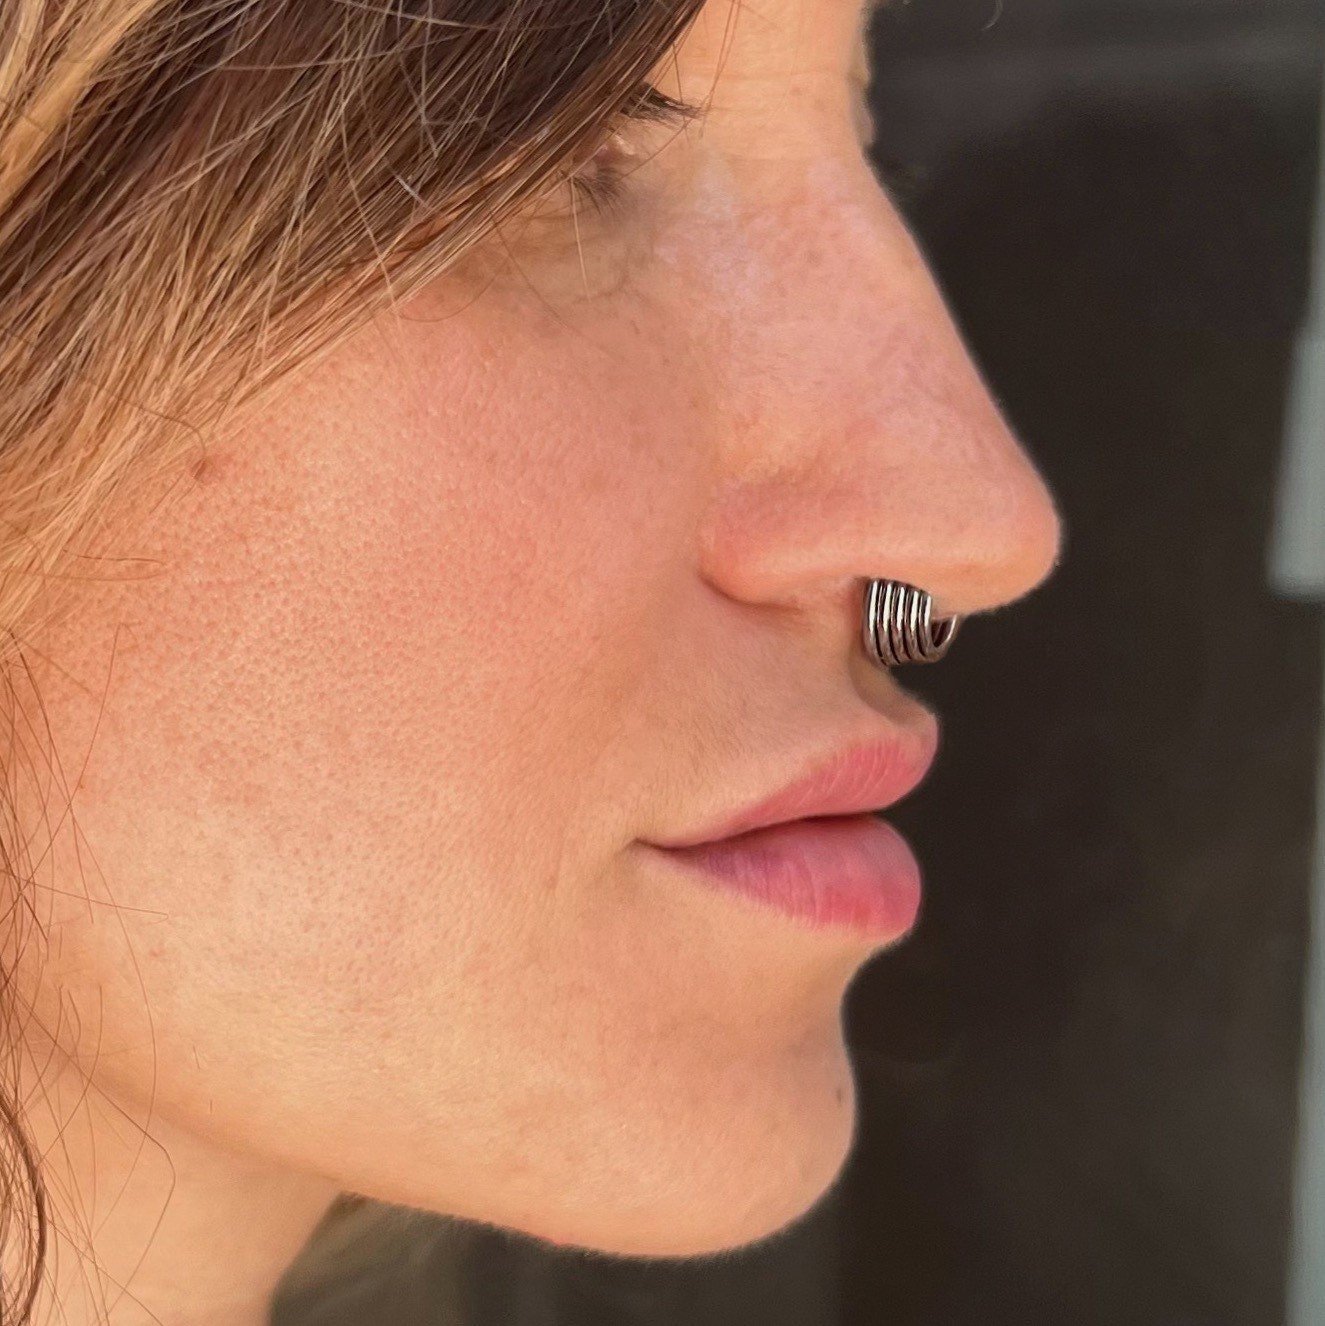 Layered Septum Ring | Five Stack Nose Clicker Ring - DustyJewelz